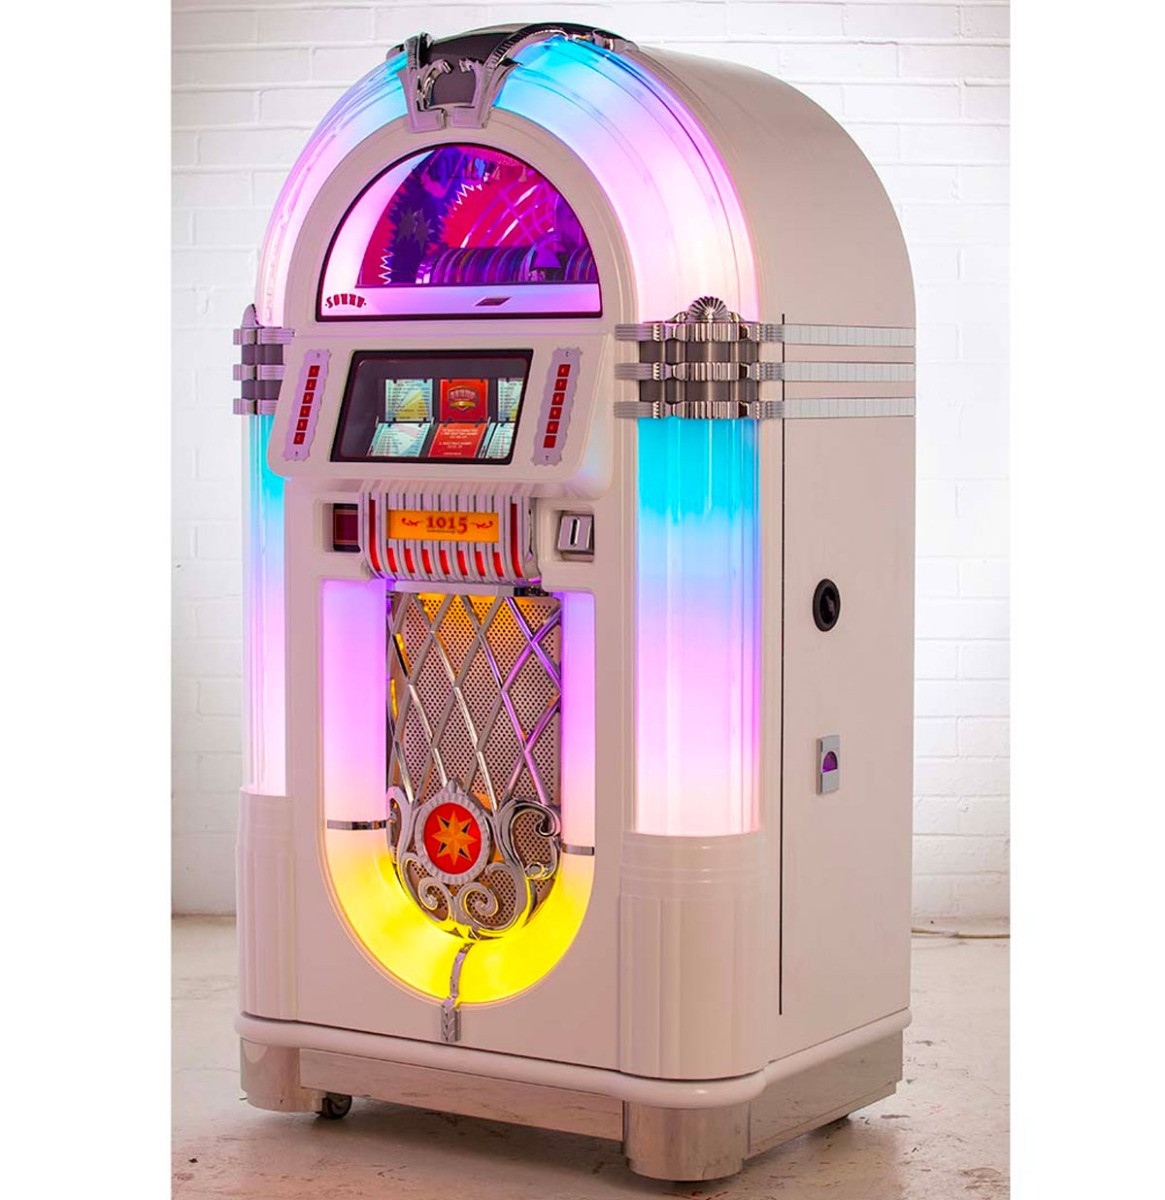 Sound Leisure 80-CD Jukebox 1015 - Wit Glans - Bentley Grill, Incl. Diamond Led Pack